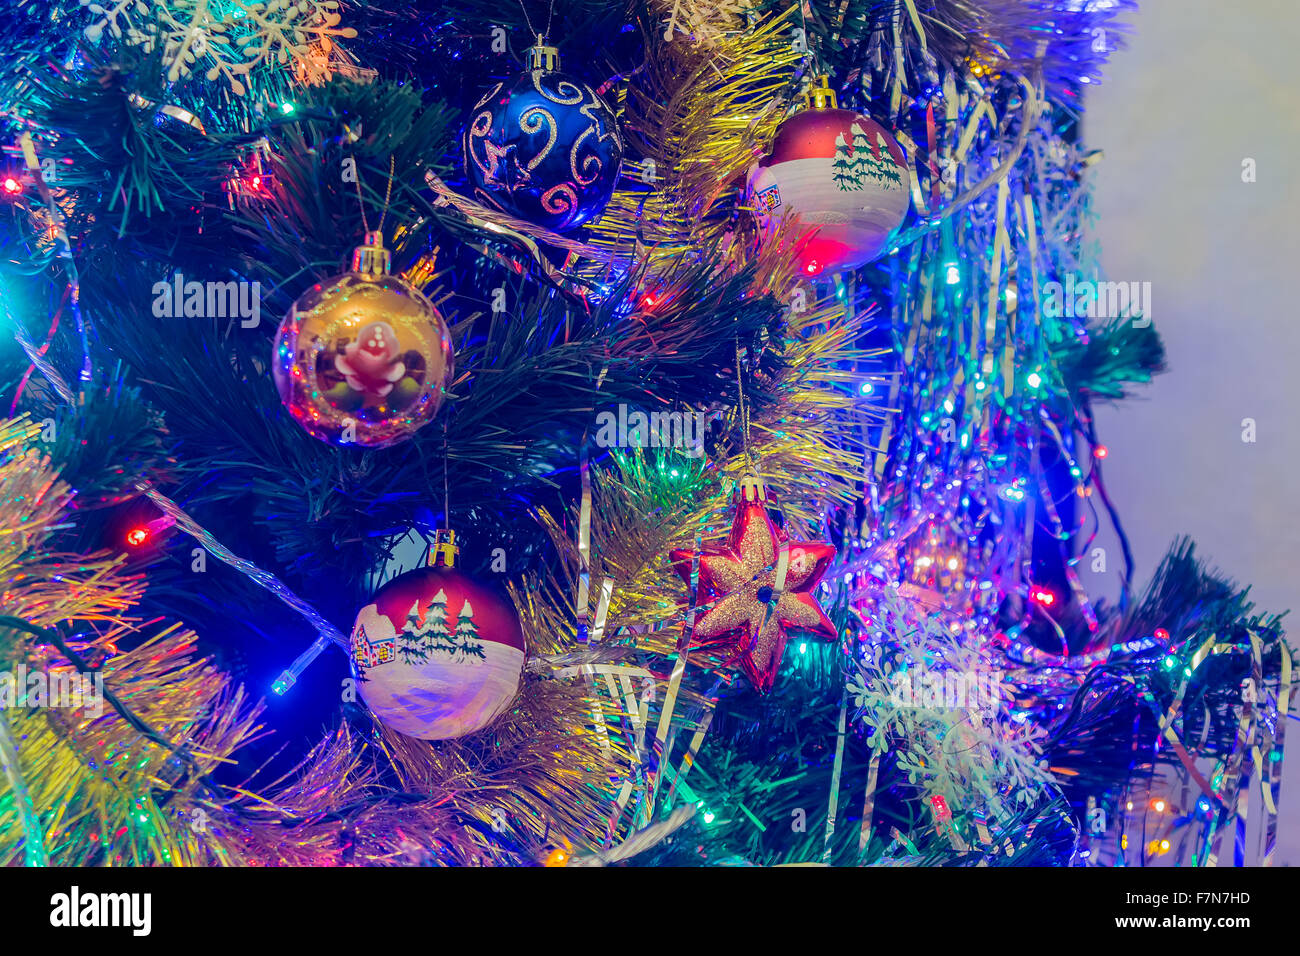 Christmas New Year's toys on a blurred background of Christmas trees and garlands. Stock Photo